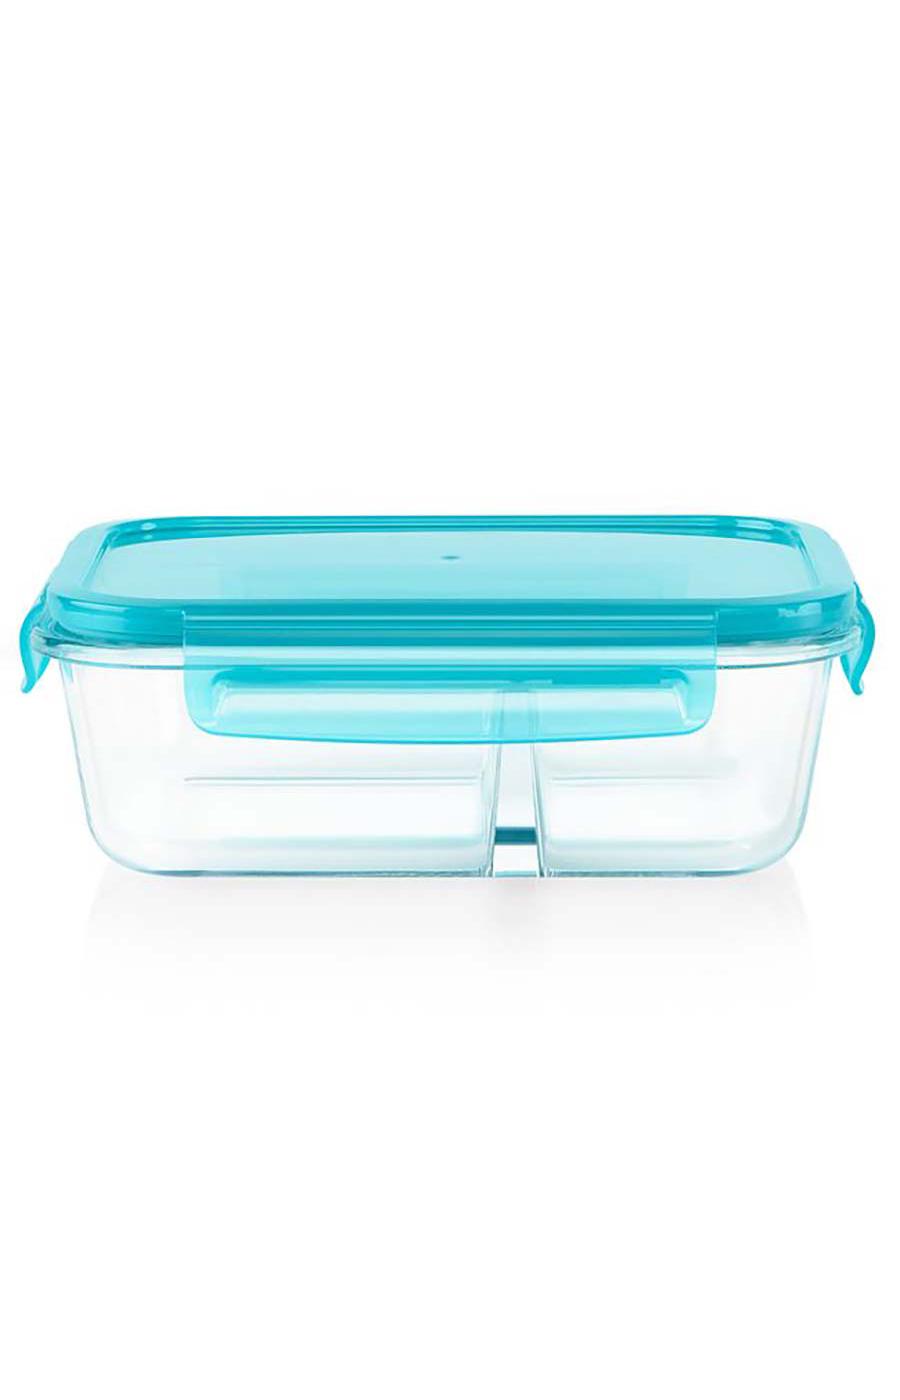 Pyrex MealBox Divided Glass Food Storage Container with Turquoise Lid; image 1 of 3